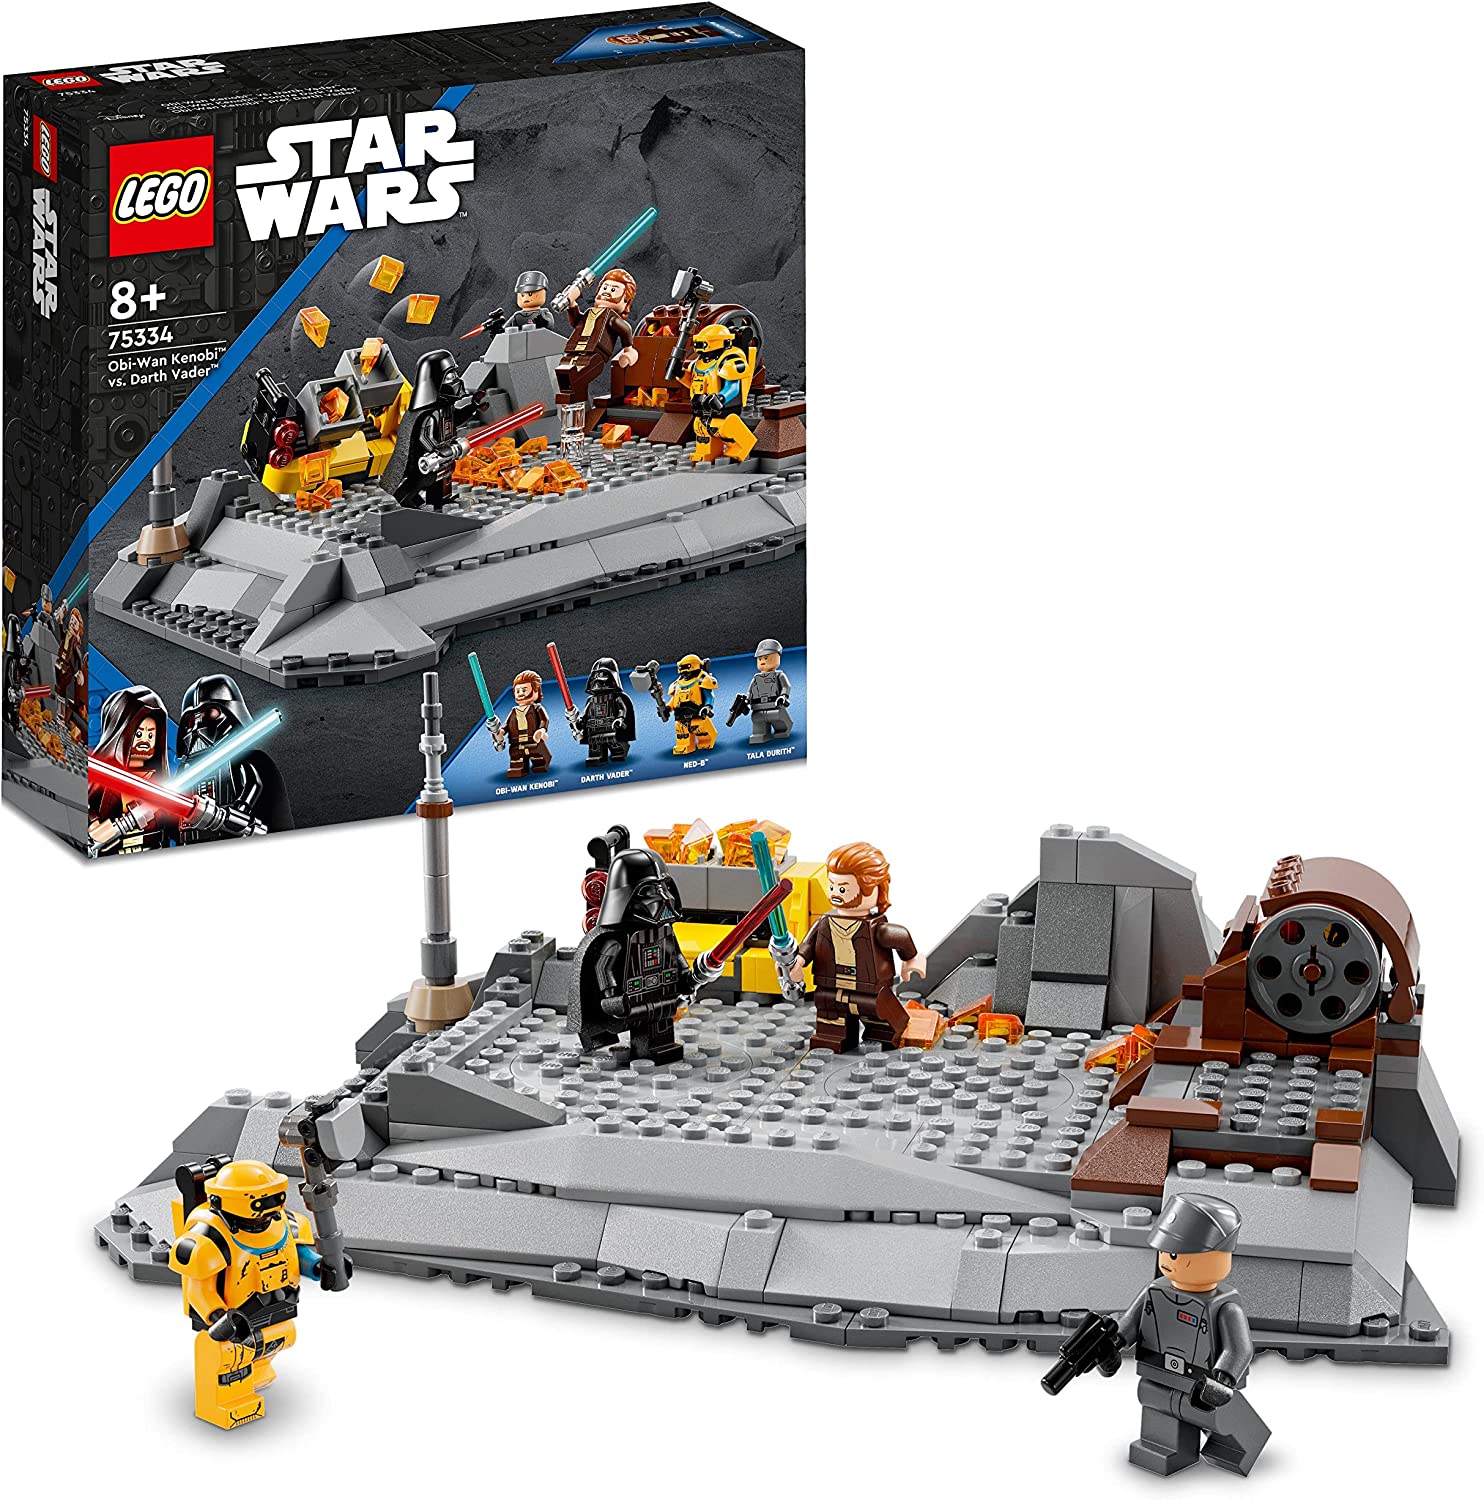 LEGO 75334 Star Wars Obi-Wan Kenobi vs. Darth Vader Playset with Duel Platforms and Mini Figures, Buildable Toy for Children from 8 Years